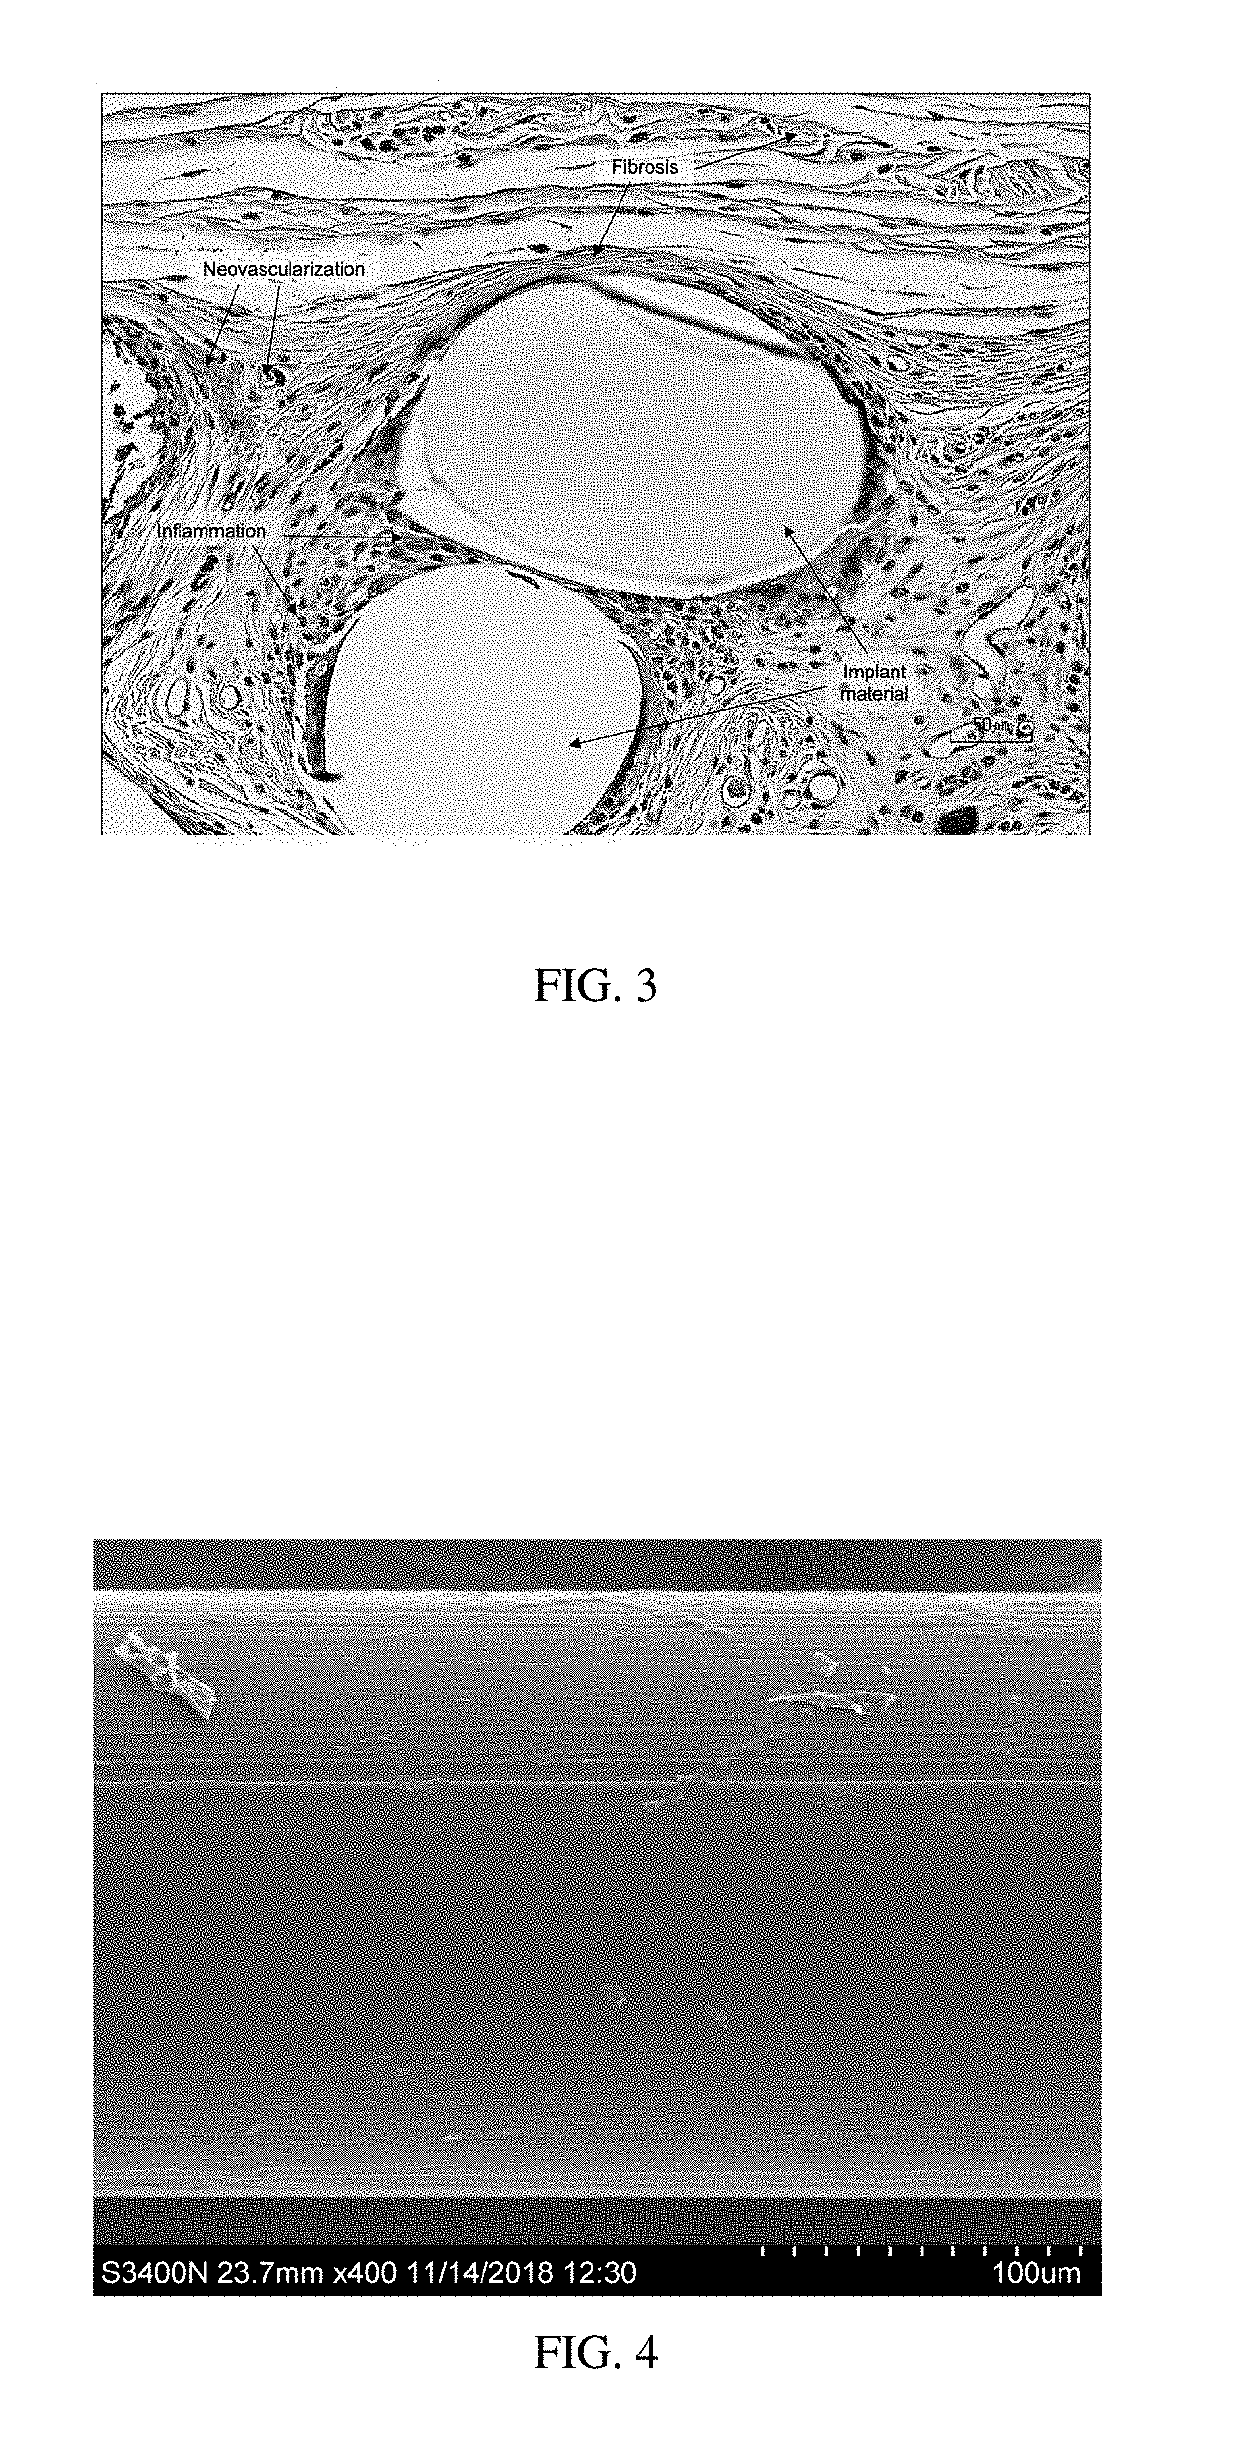 Surgial mesh implants containing poly(butylene succinate) and copolymers thereof